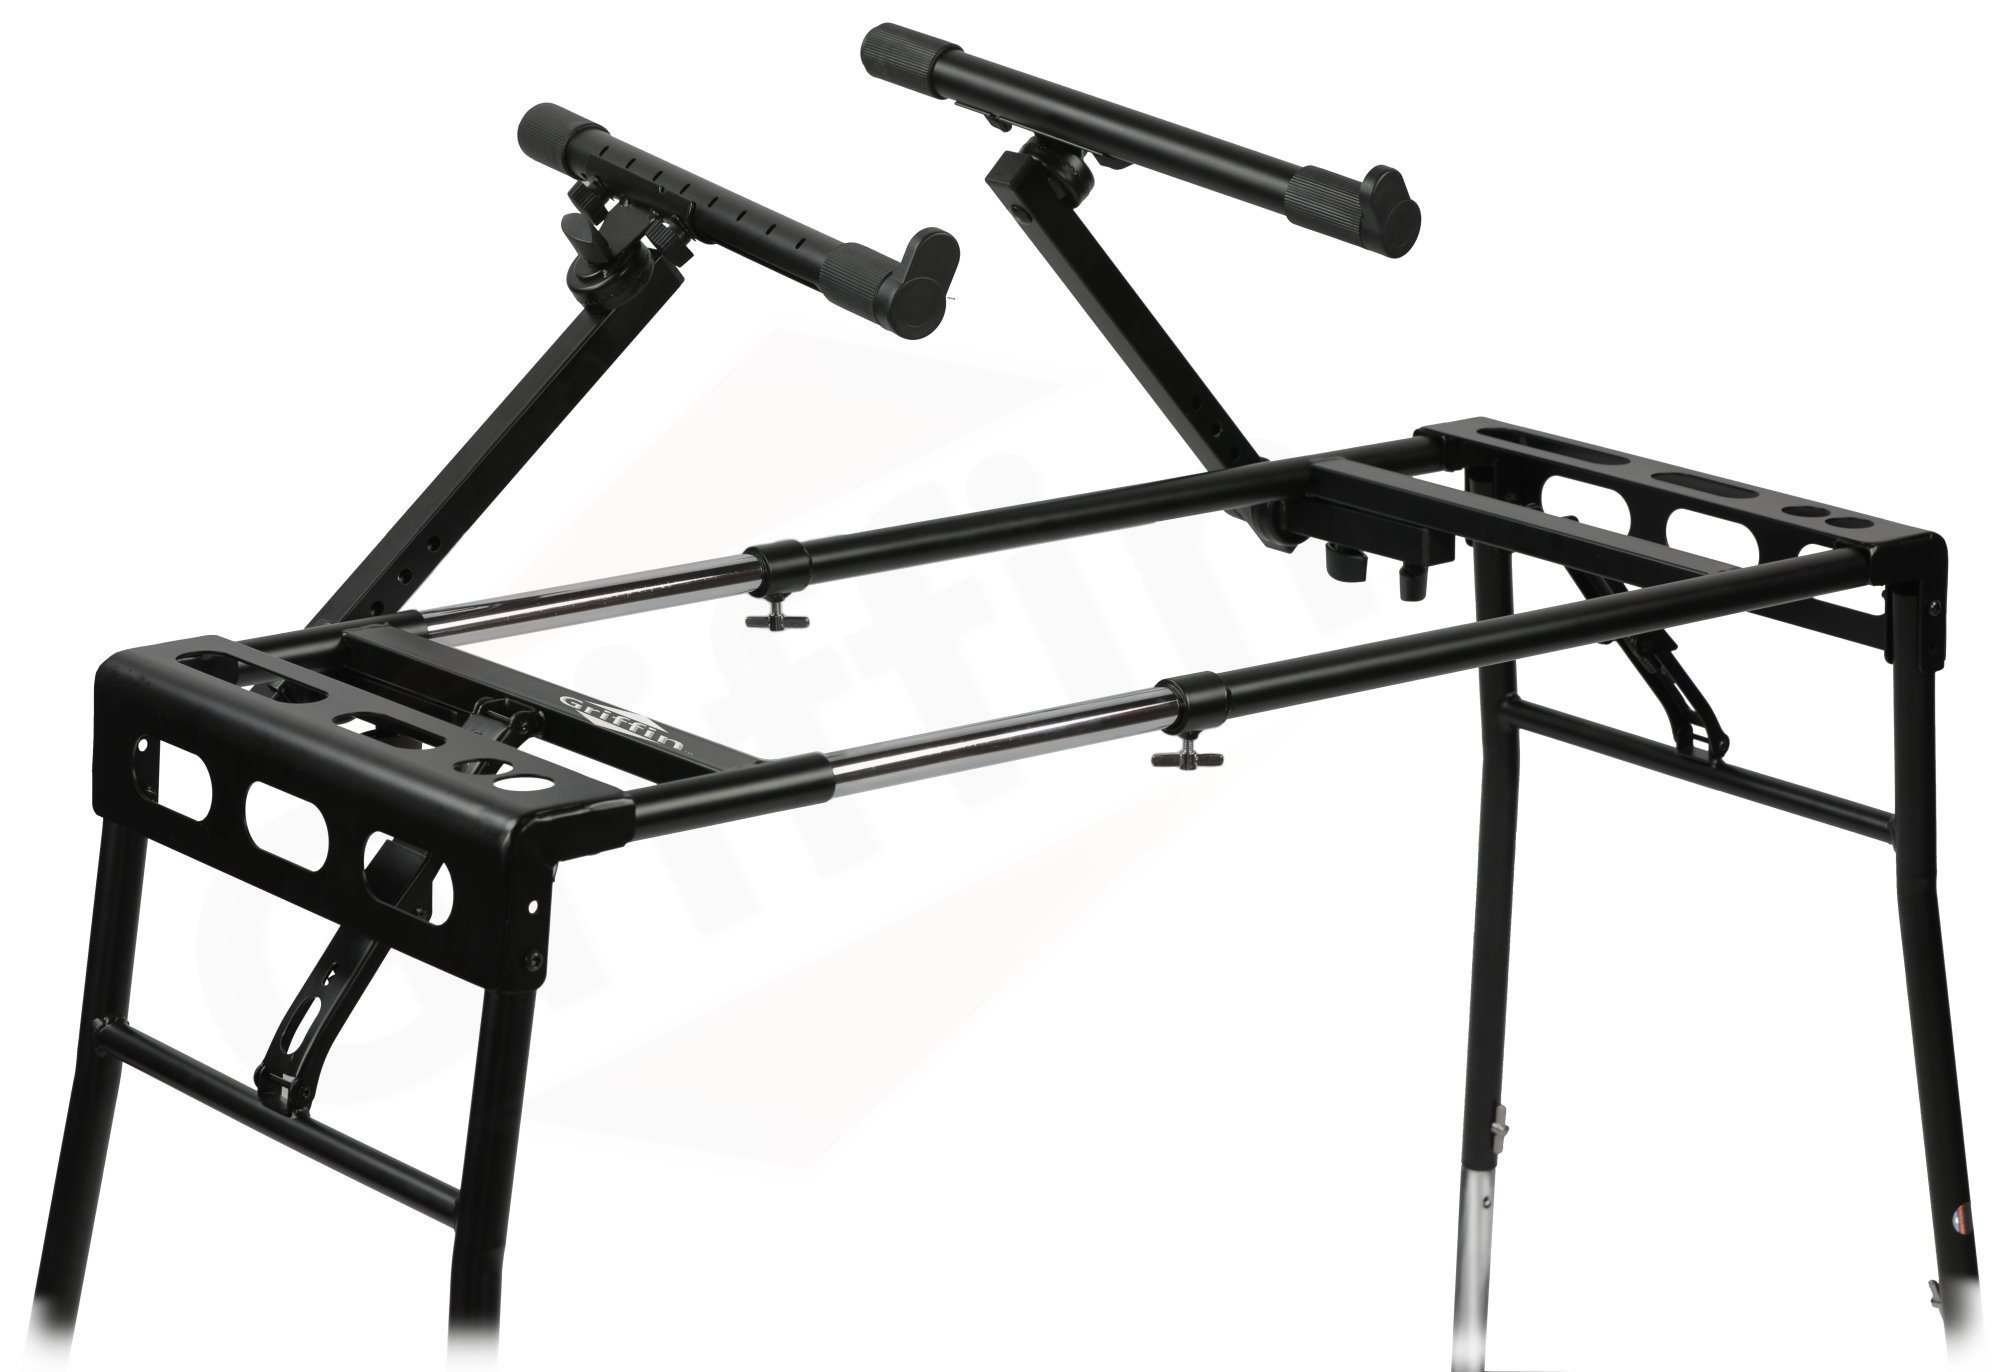 2 Tier DJ Coffin Workstation Stand by Griffin – Double Table Top